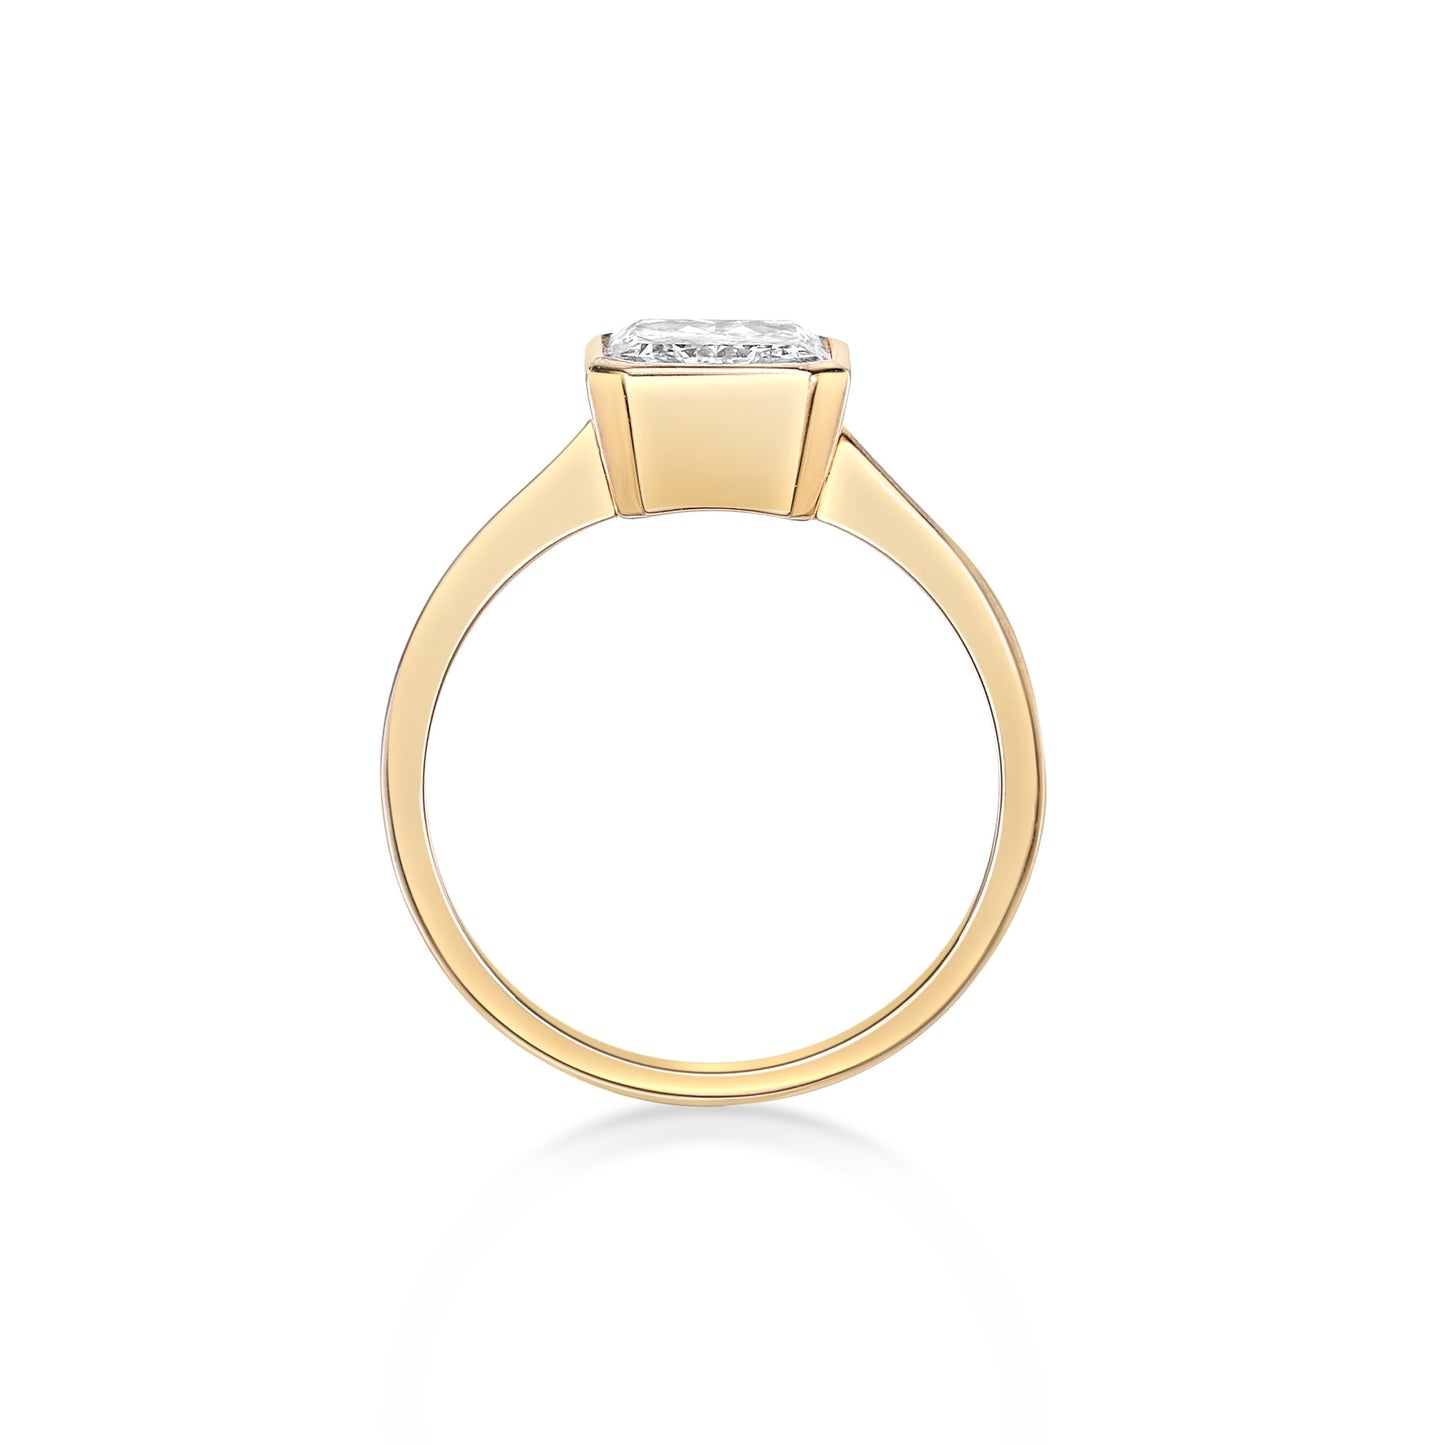 2.17ct Radiant Cut Diamond in a handmade 18K Yellow Gold Bezel Solitaire Setting